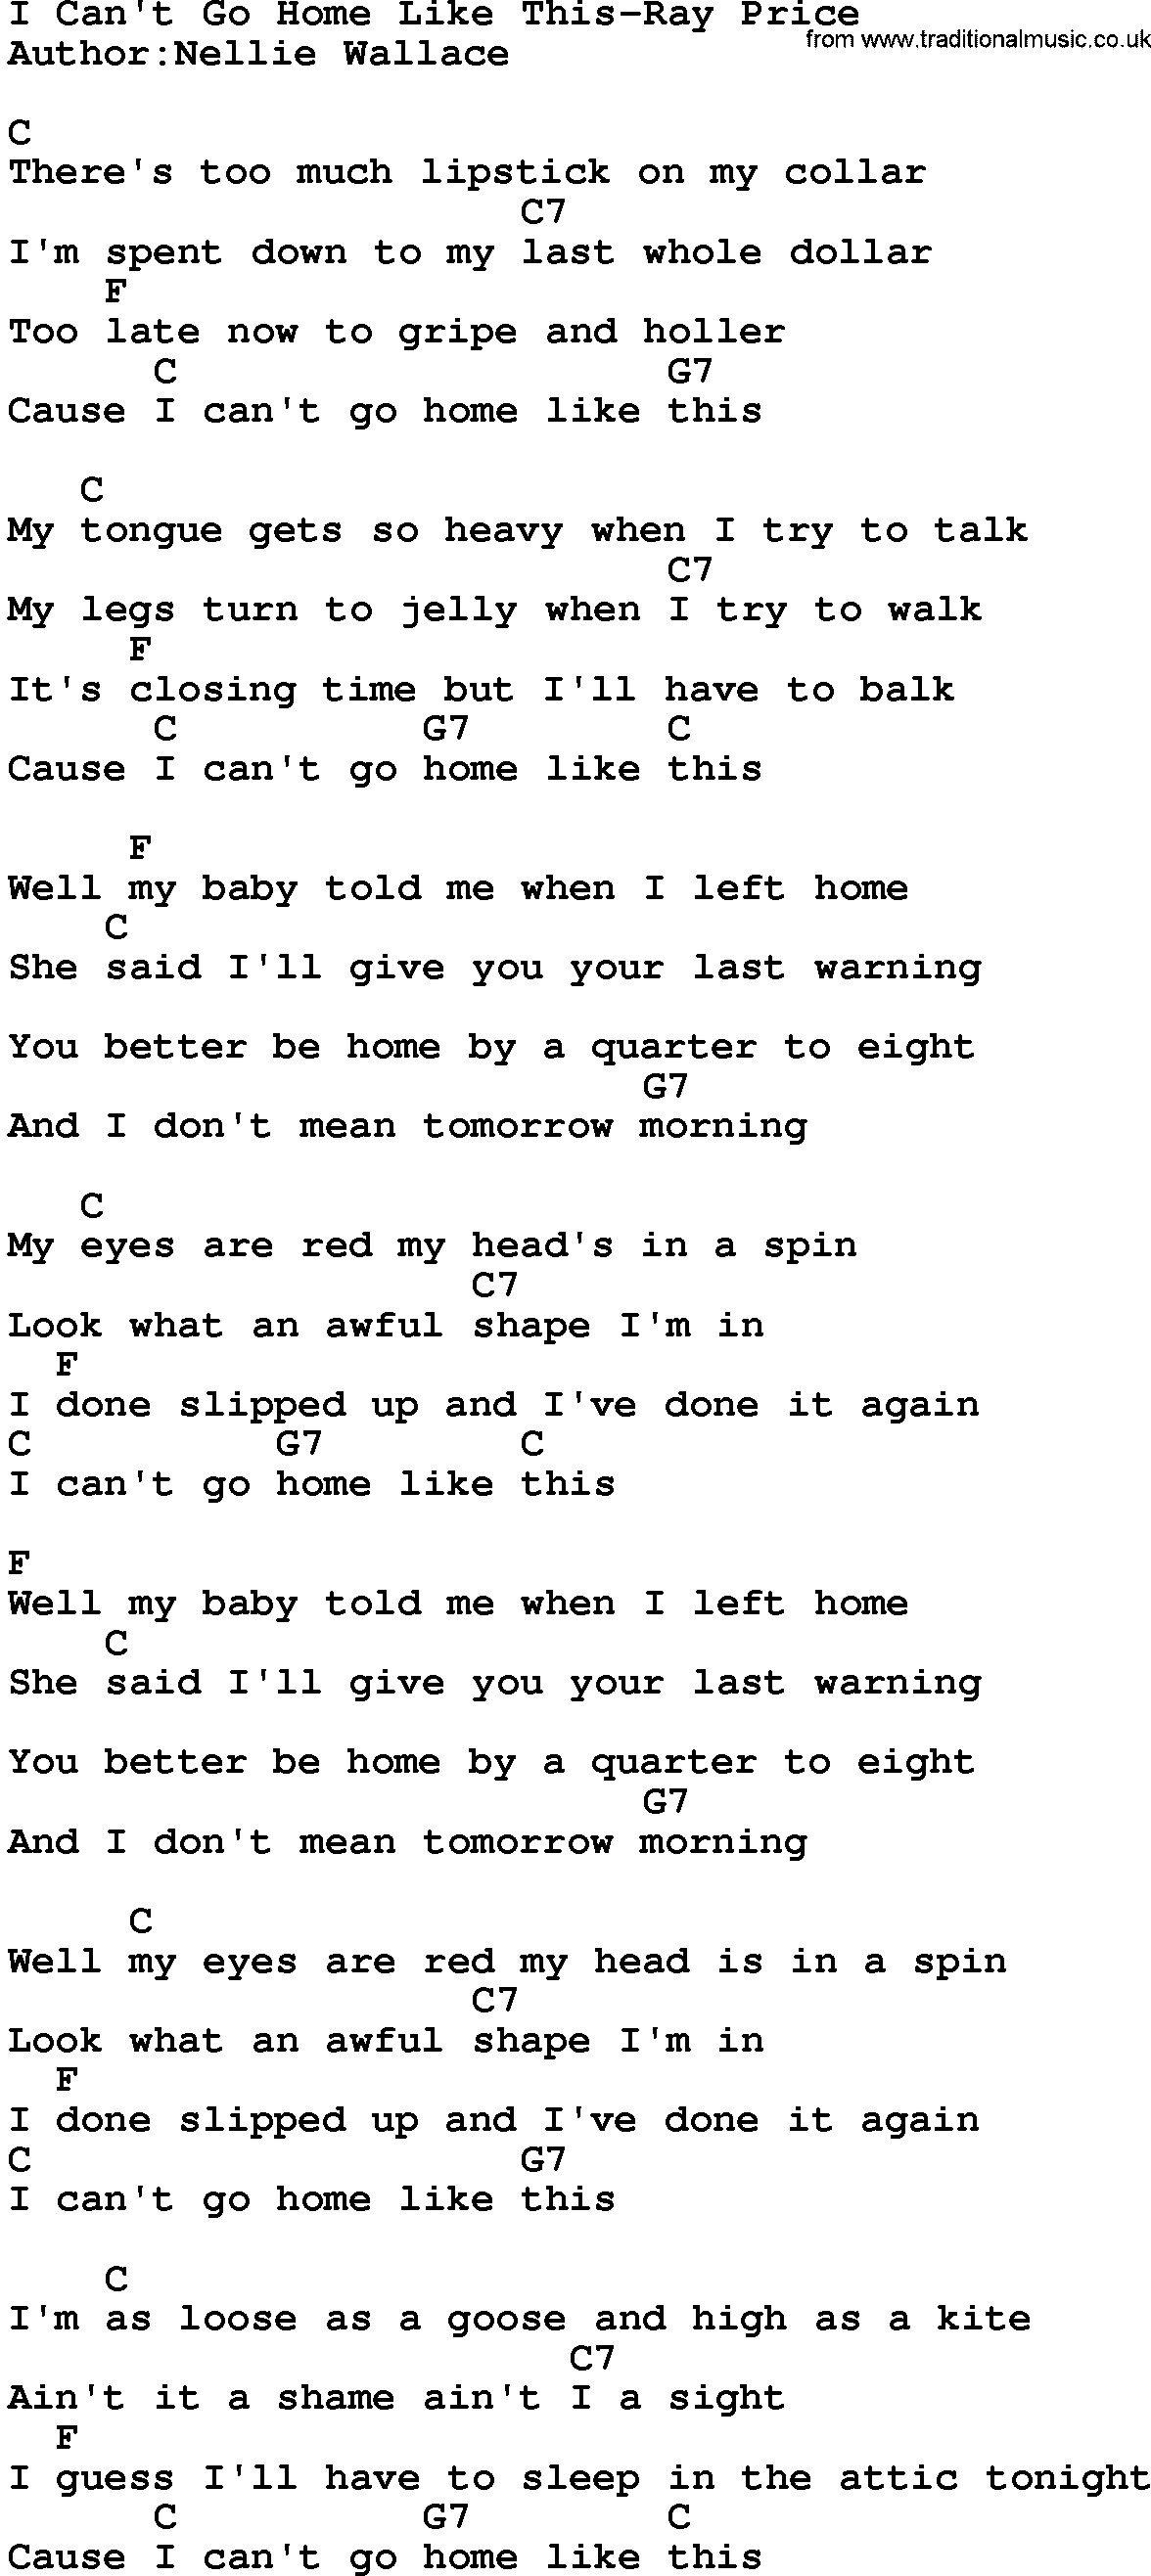 Country music song: I Can't Go Home Like This-Ray Price lyrics and chords